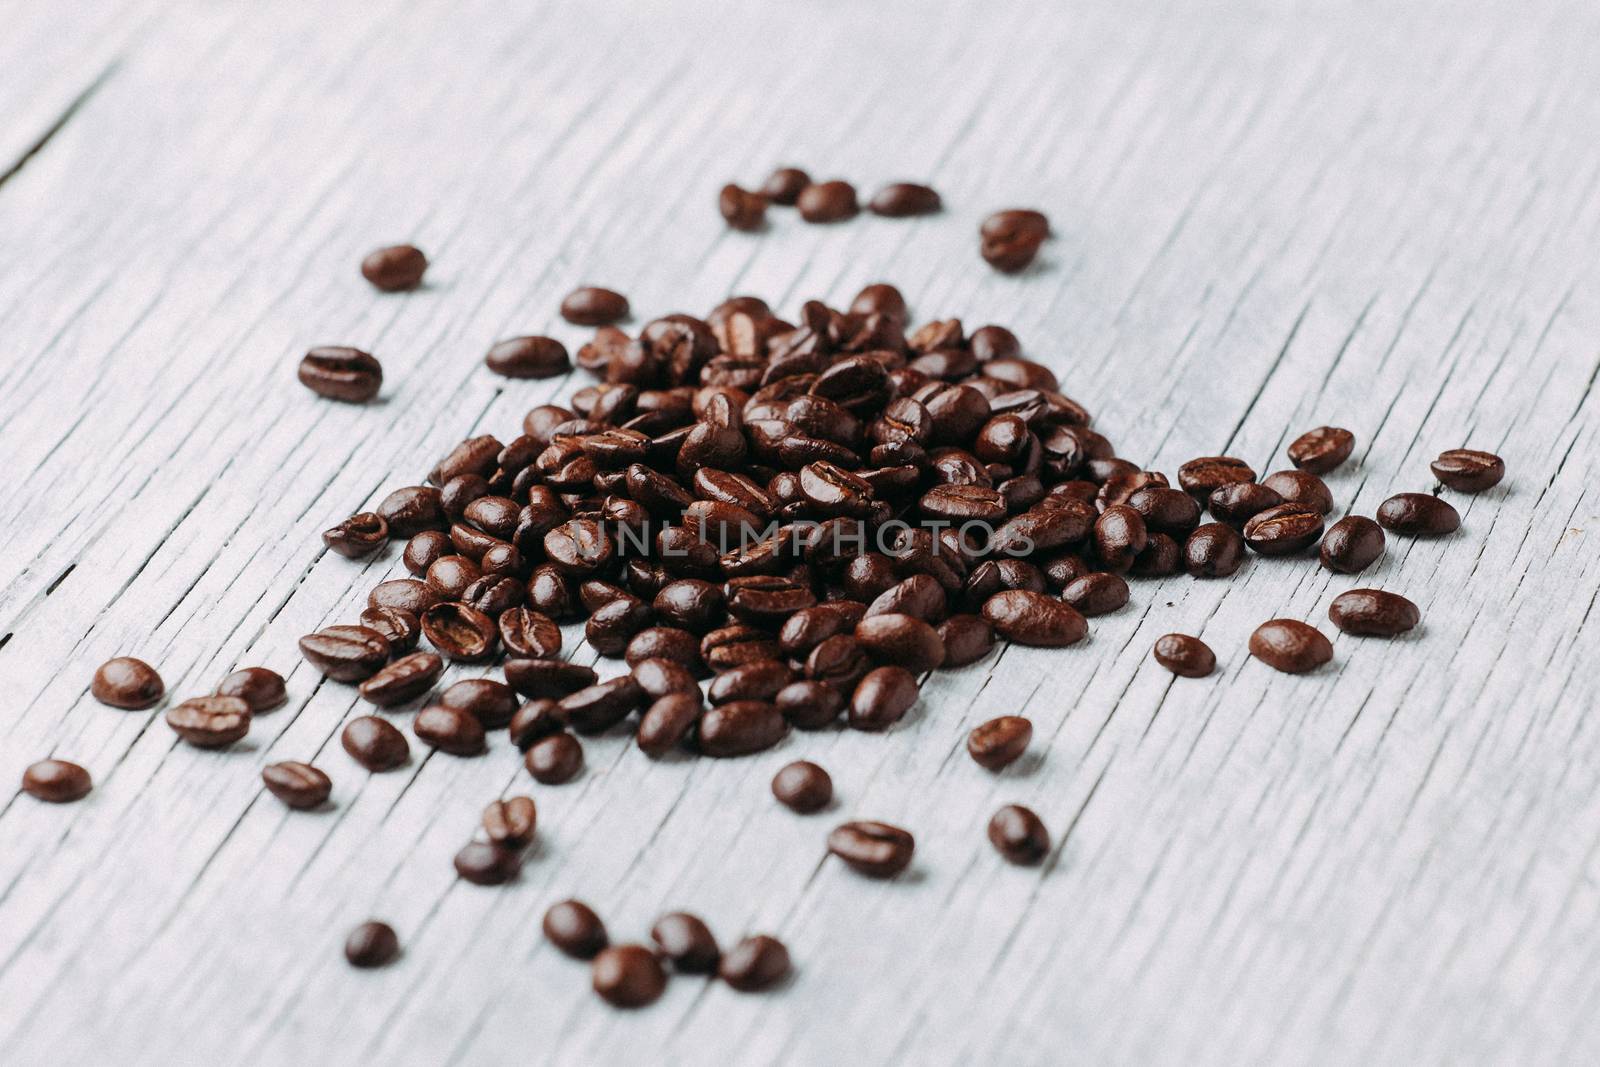 A scattering of coffee beans on a white wooden background.
 by Opikanets